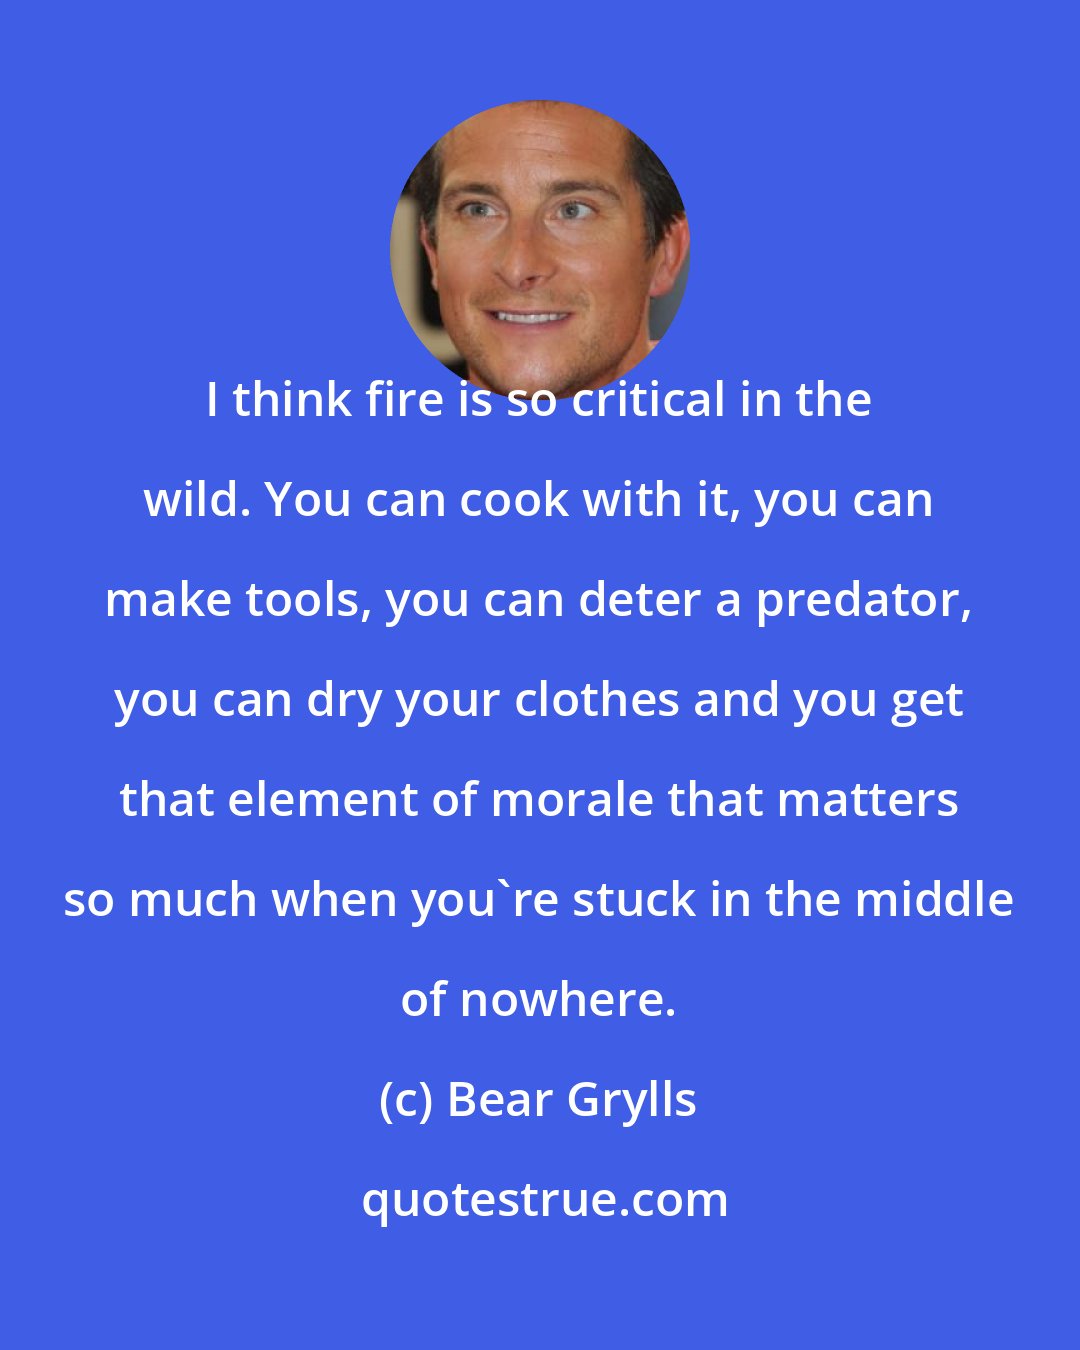 Bear Grylls: I think fire is so critical in the wild. You can cook with it, you can make tools, you can deter a predator, you can dry your clothes and you get that element of morale that matters so much when you're stuck in the middle of nowhere.